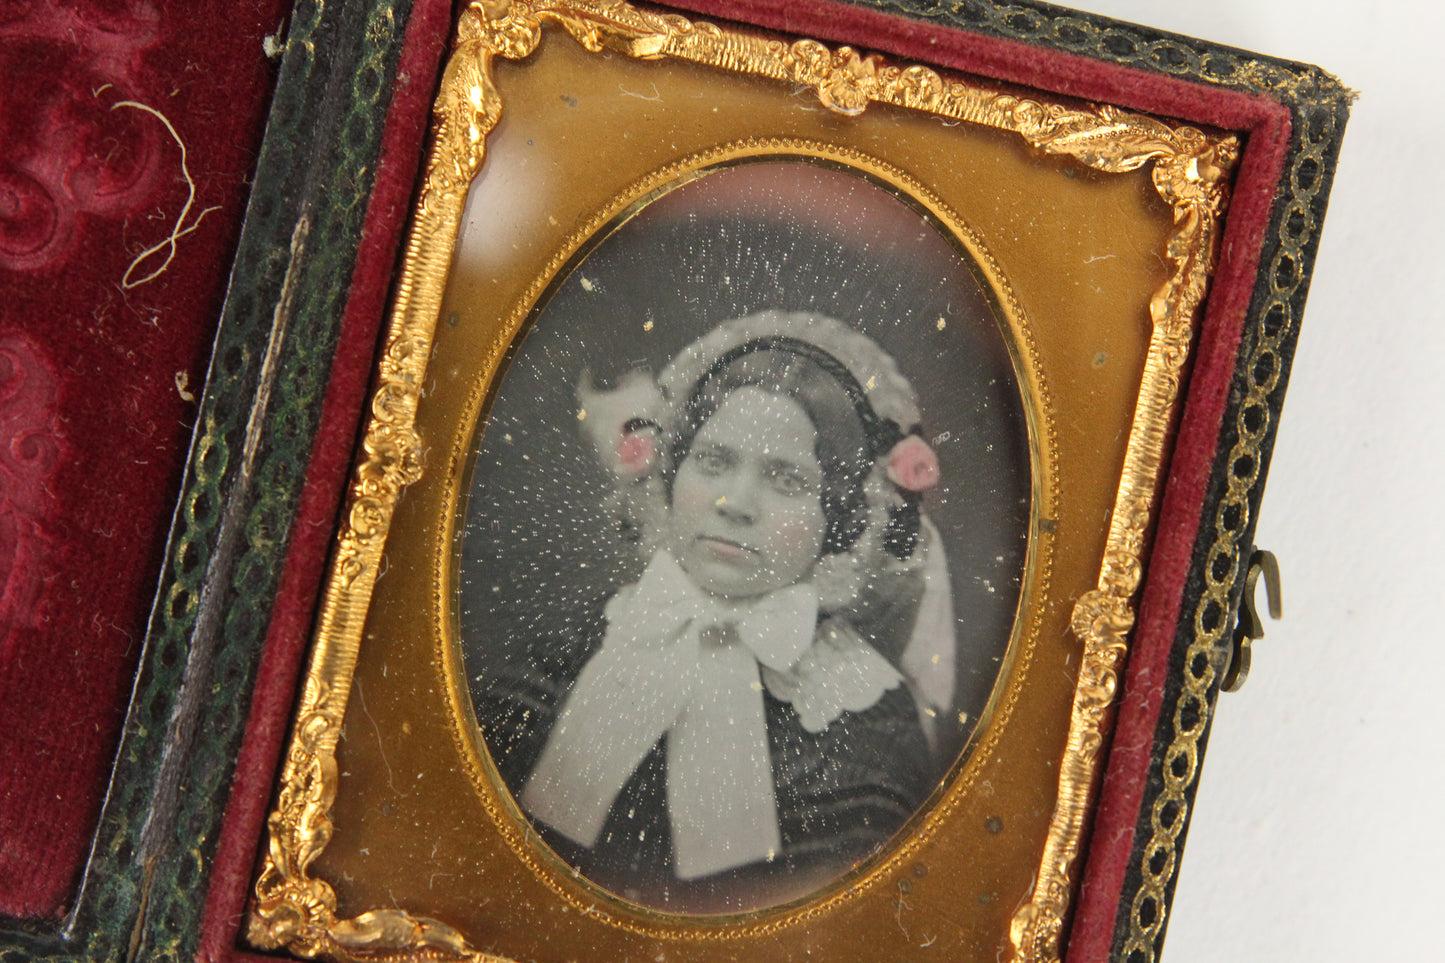 Daguerreortype Photograph of a Young Woman in Full Case (1/9 Plate)